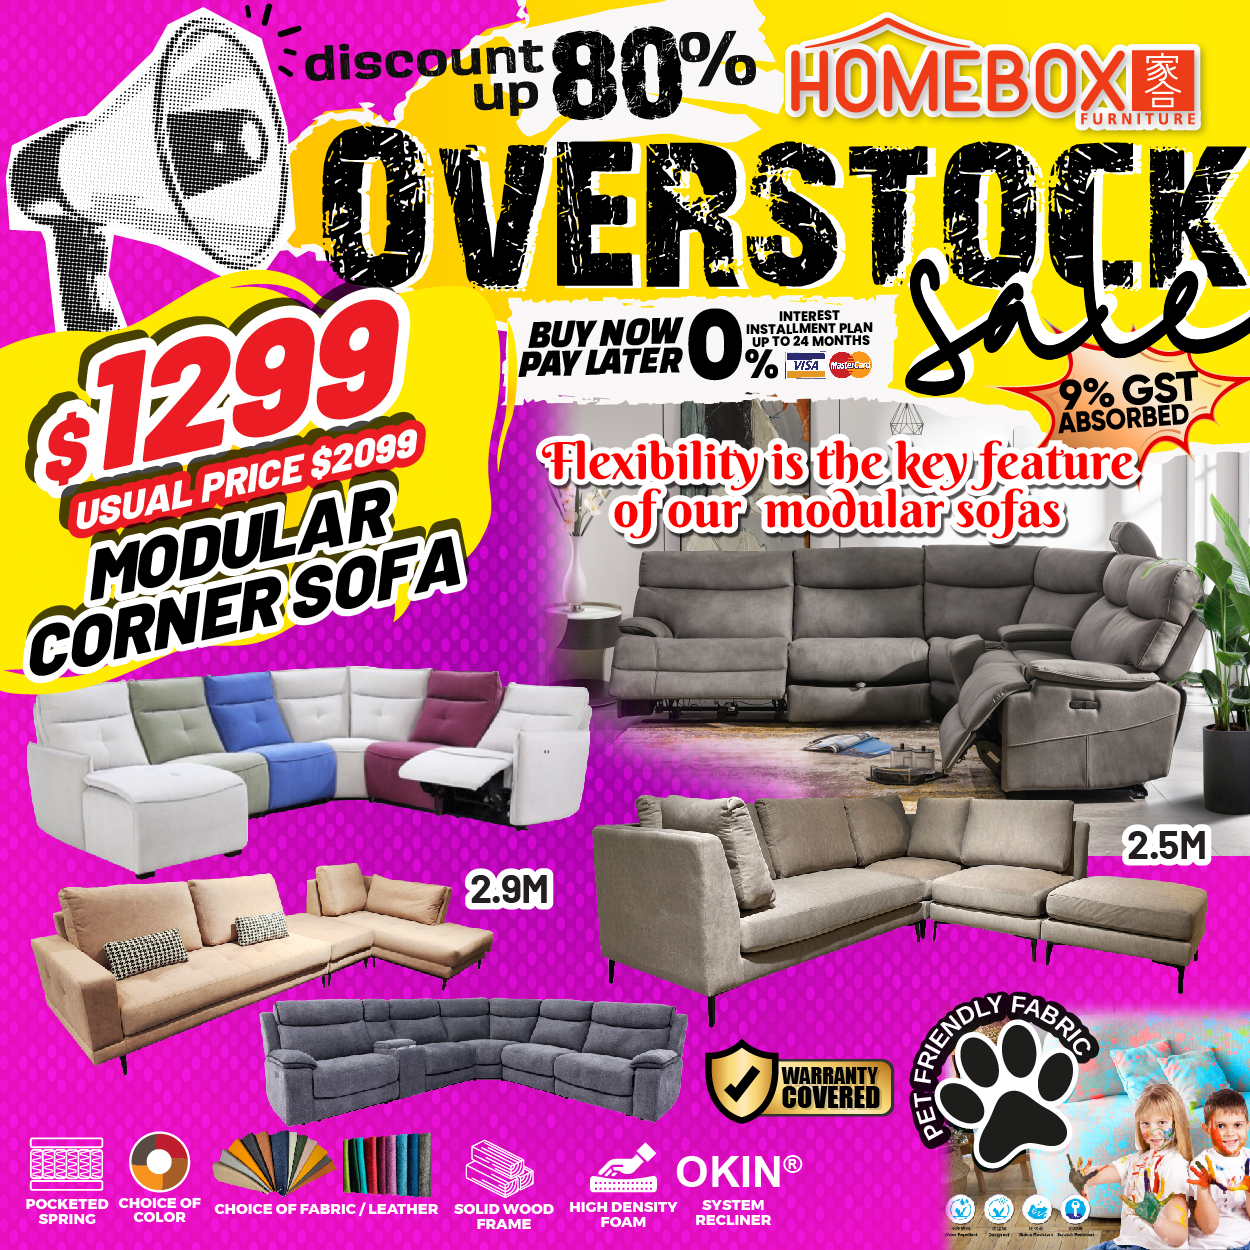 Lobang: Overstock sale at HOMEBOX Furniture @ Aljunied has furniture at up to 80% off from 17 Feb - 3 Mar 24 - 15